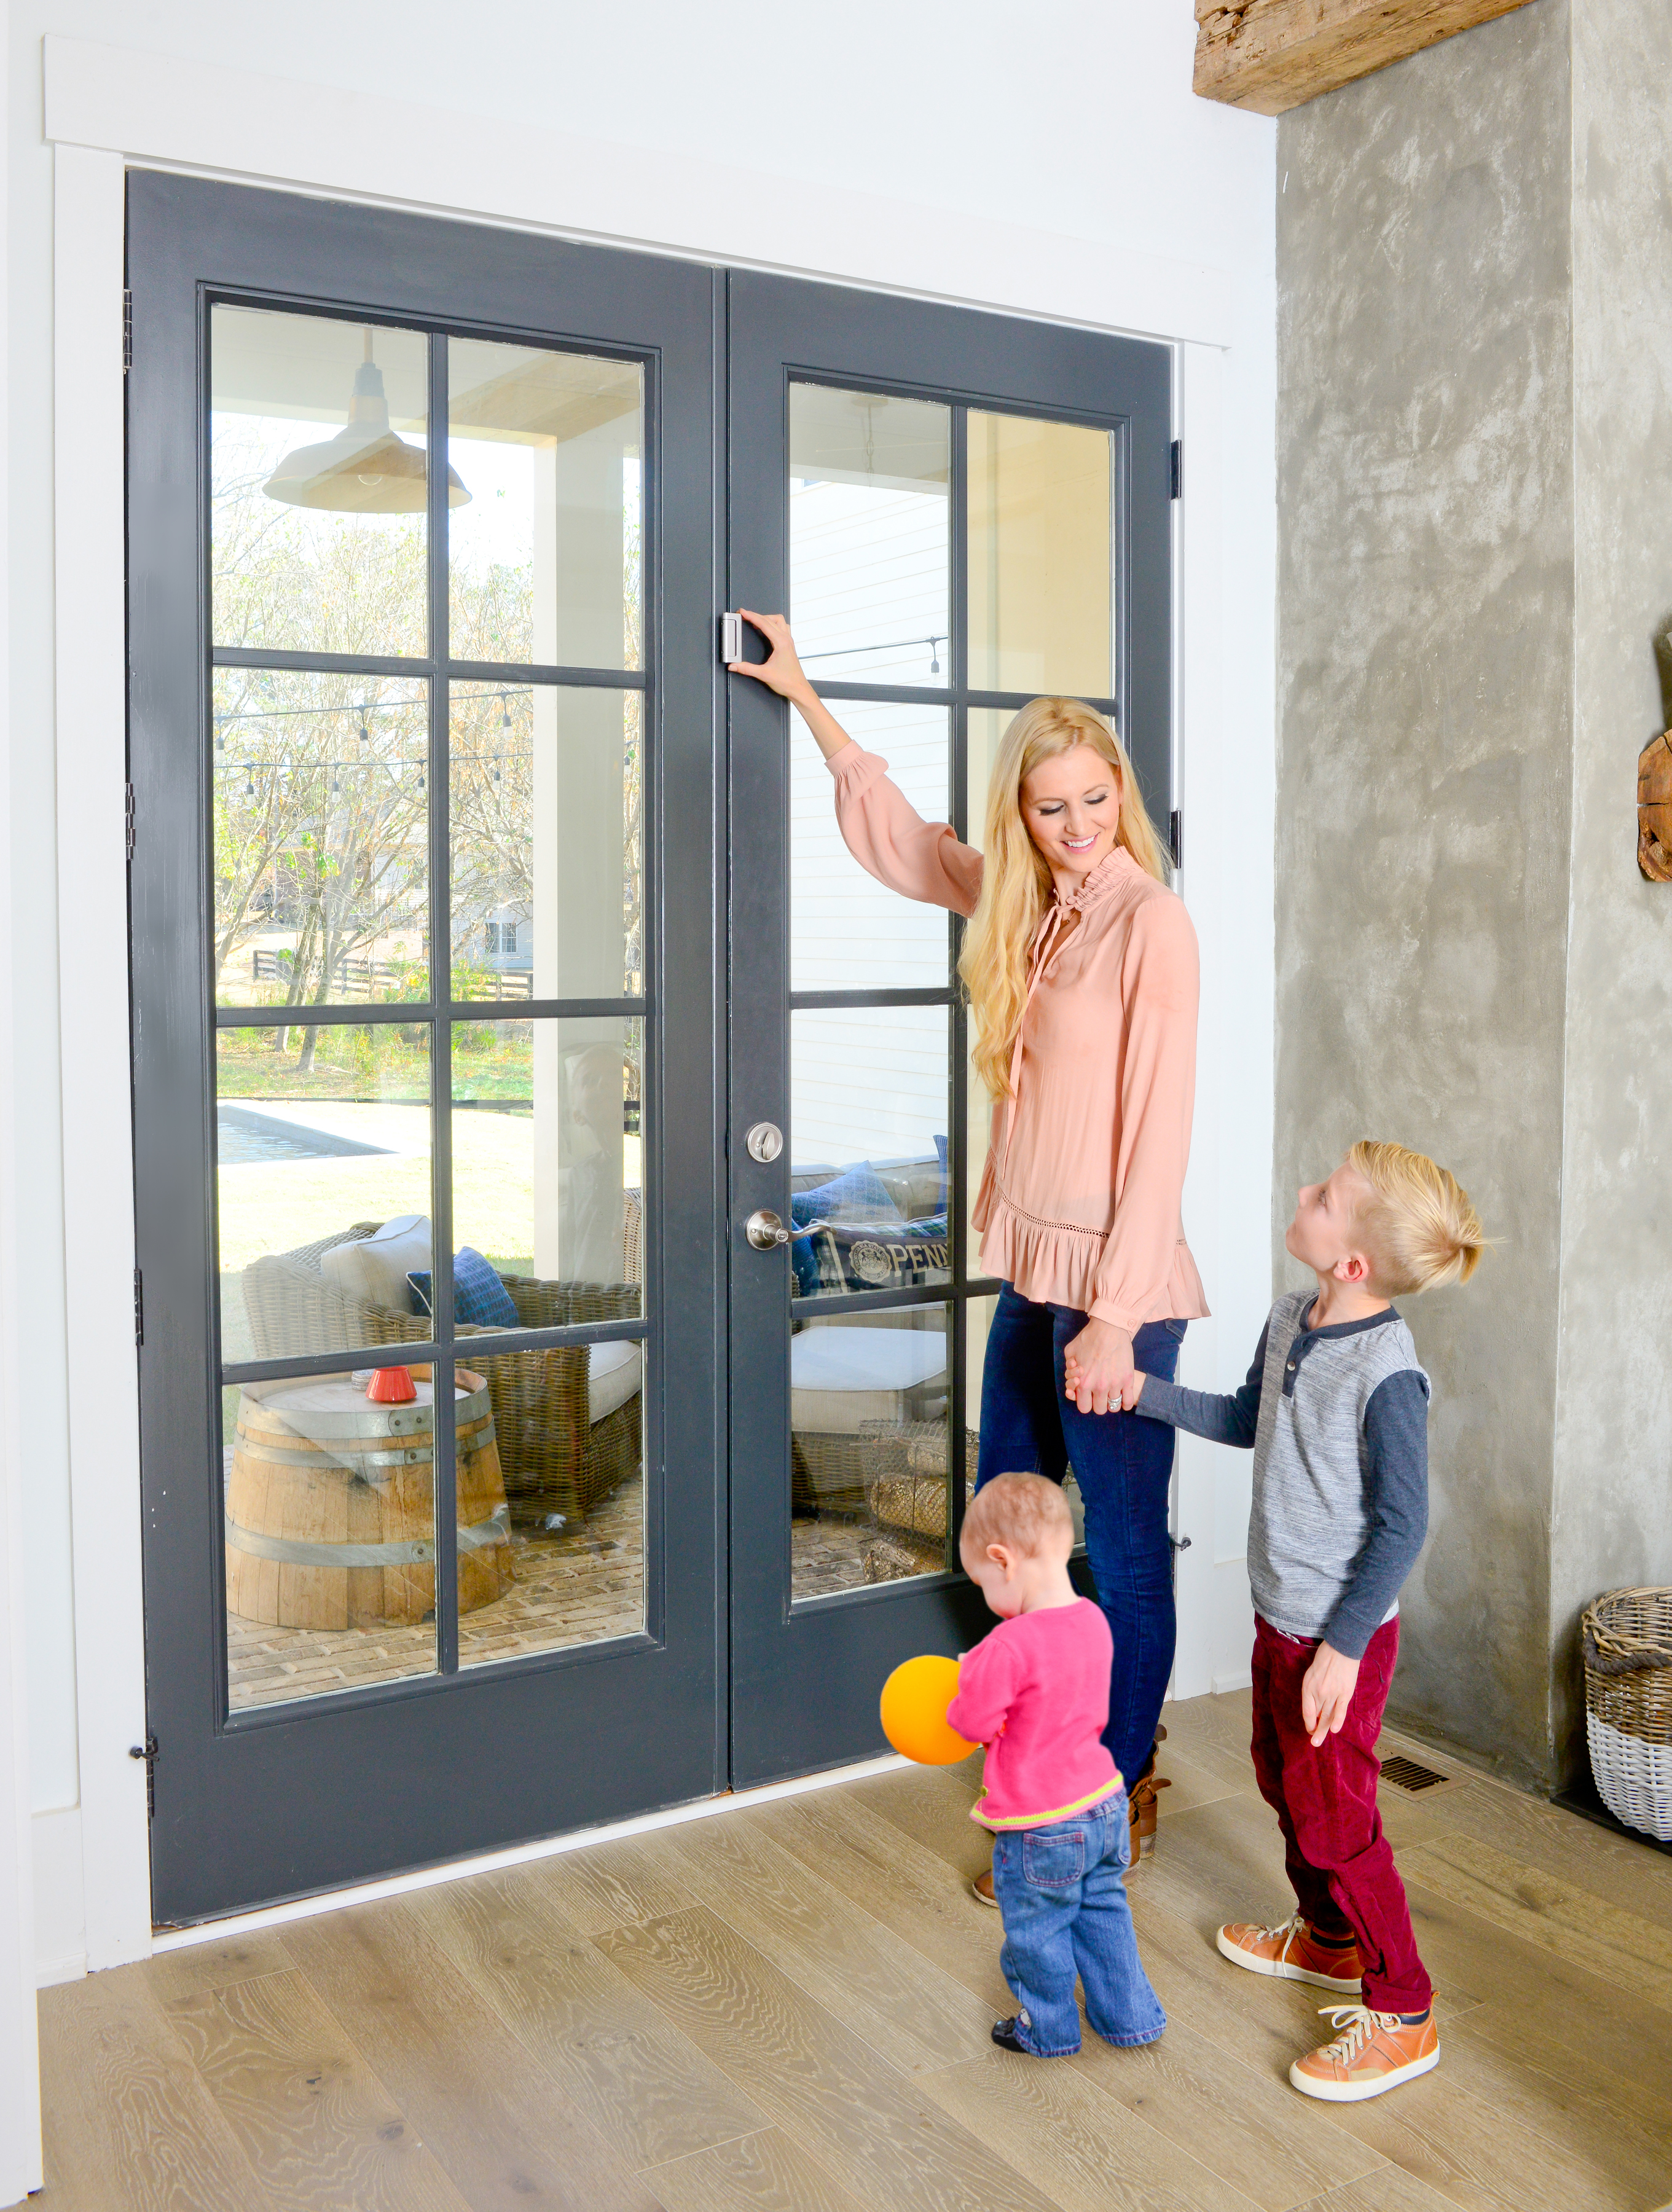 The Door Guardian, Childproof Products, Home Safety